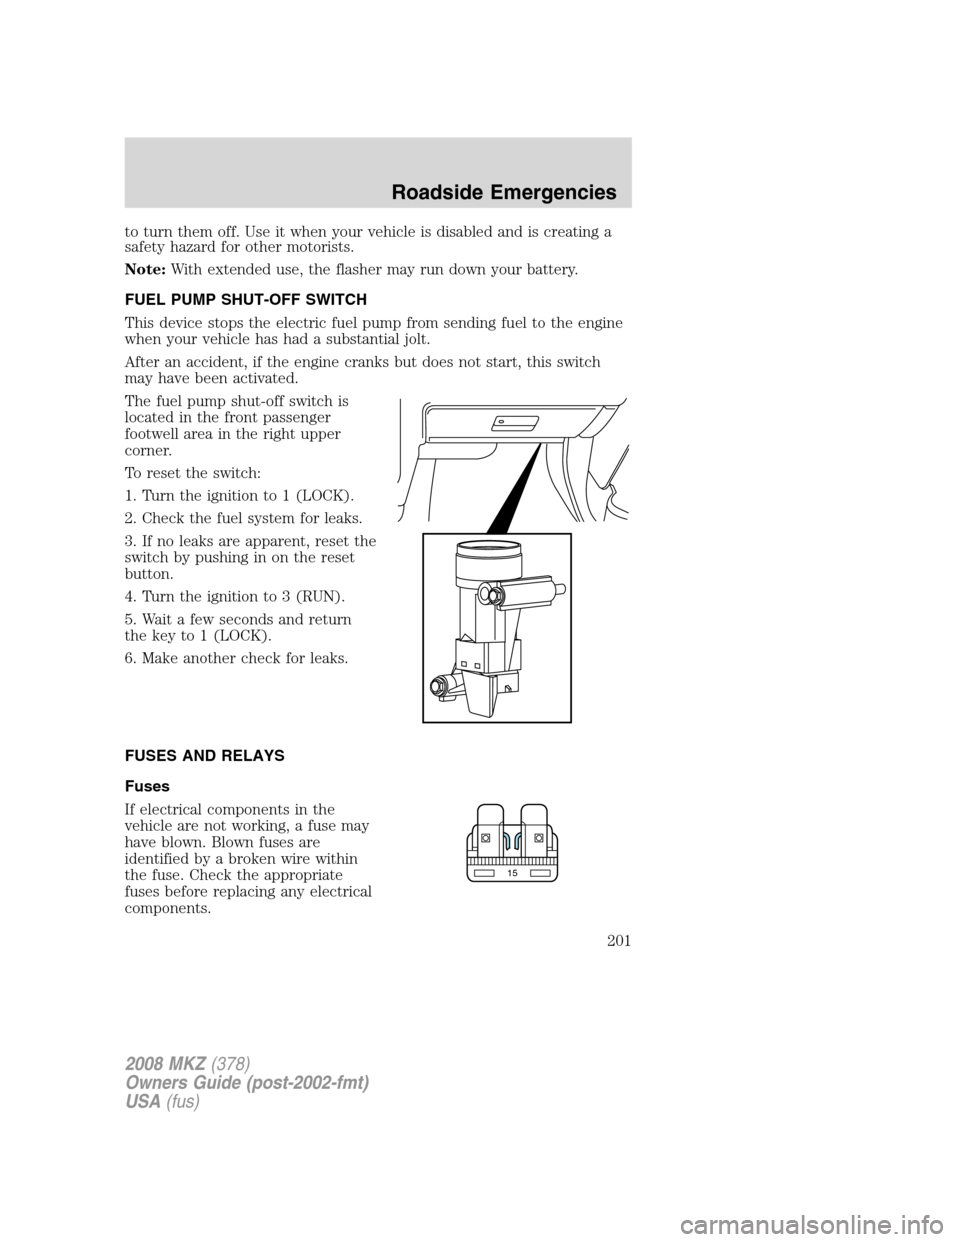 LINCOLN MKZ 2008  Owners Manual to turn them off. Use it when your vehicle is disabled and is creating a
safety hazard for other motorists.
Note:With extended use, the flasher may run down your battery.
FUEL PUMP SHUT-OFF SWITCH
Thi